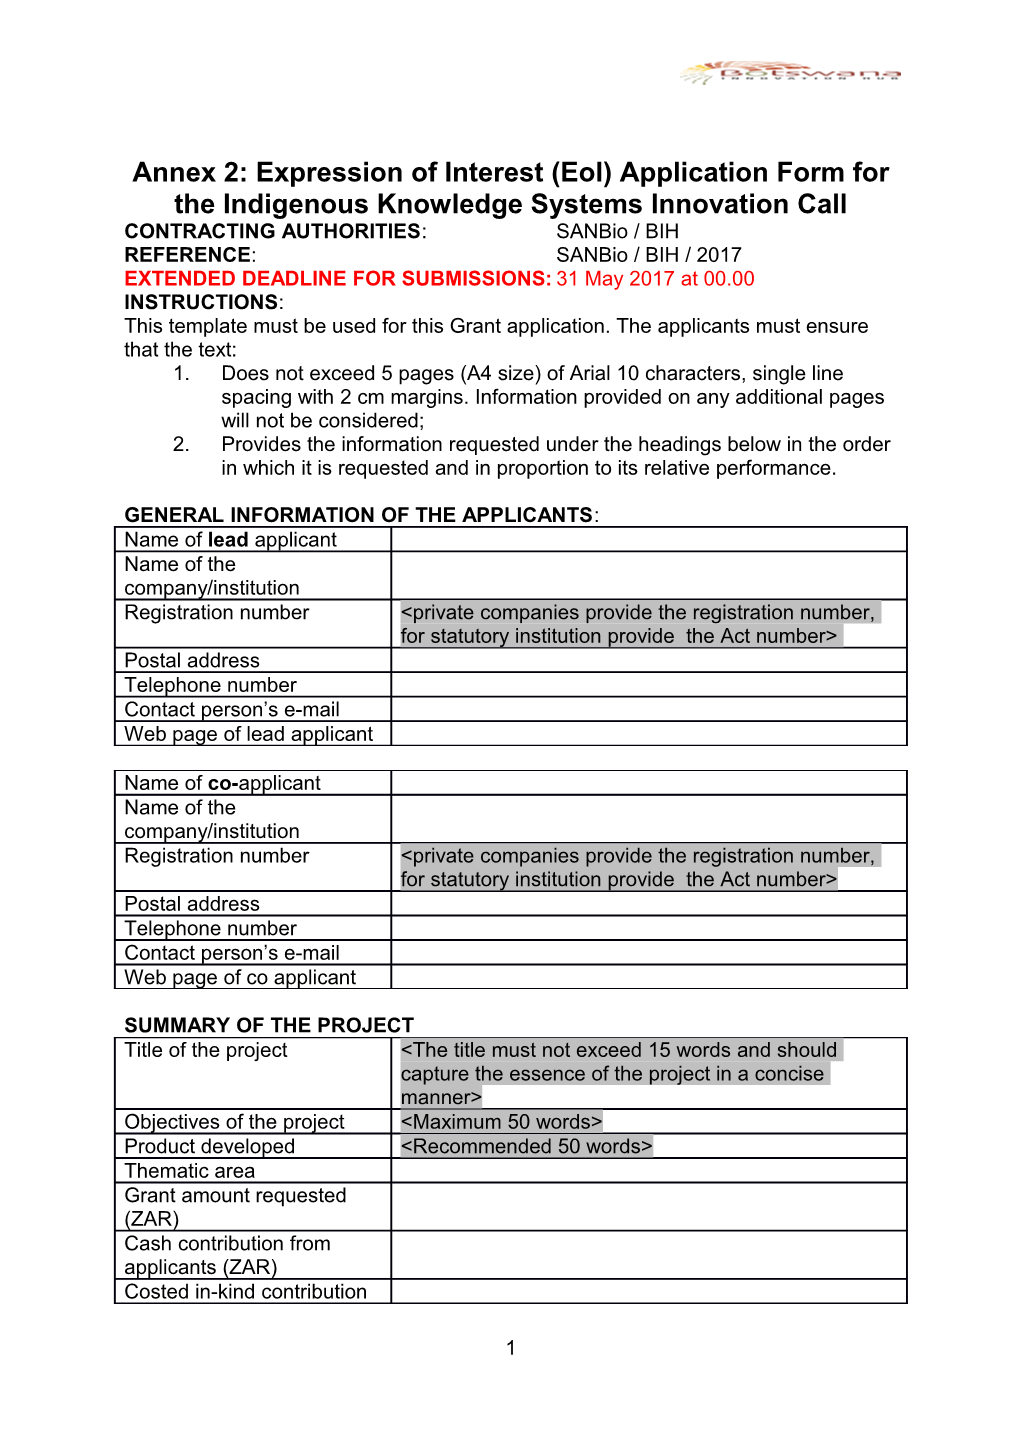 Annex 2: Expression of Interest (Eoi) Application Form for the Indigenous Knowledge